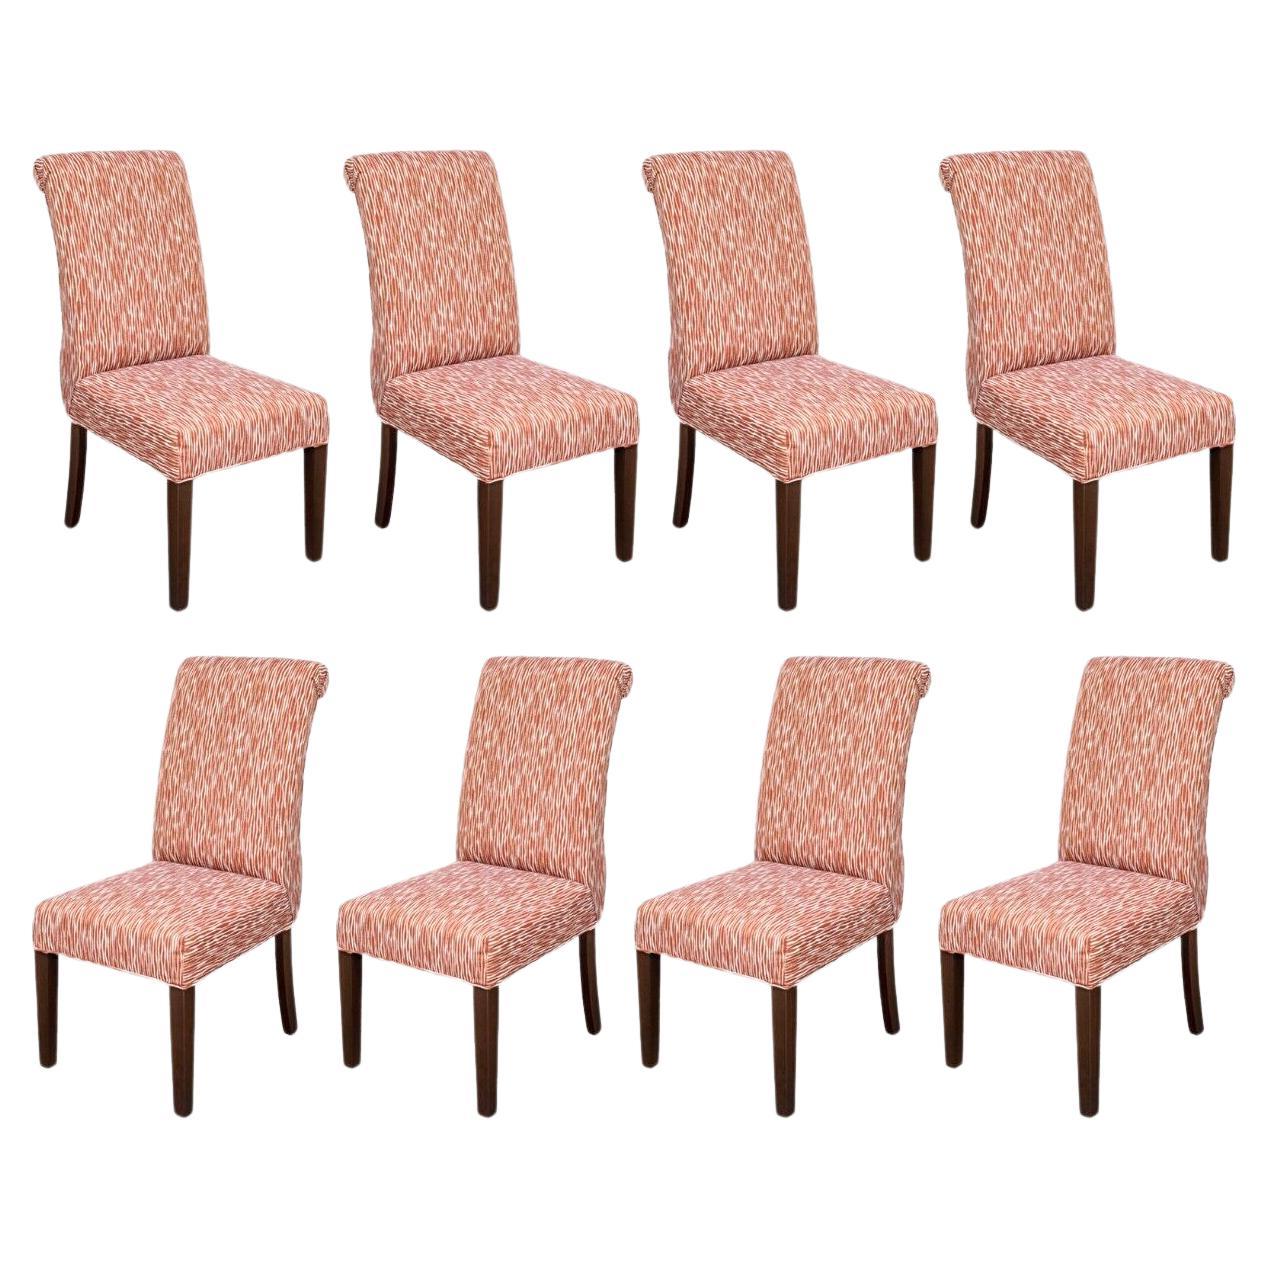 Set of 8 Orange and White Abstract Striped Print Roll Back Dining Chairs